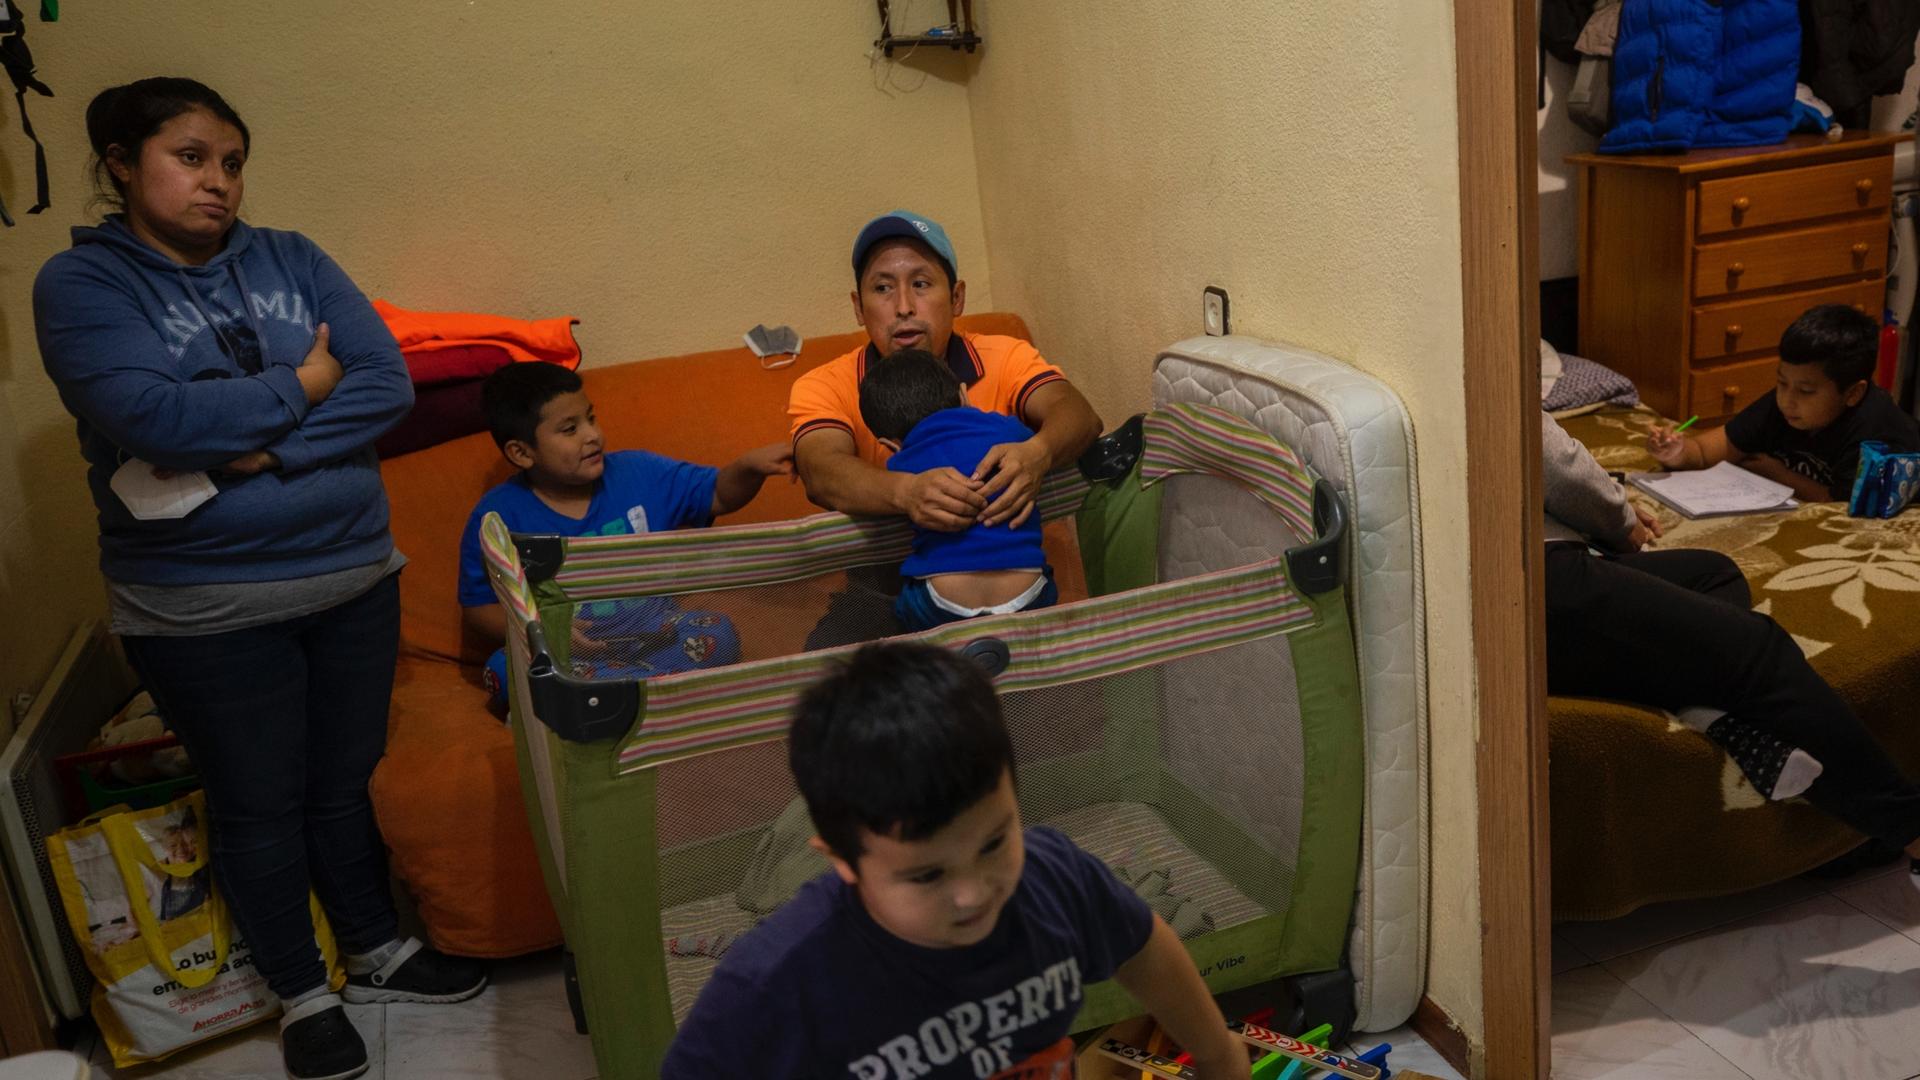 Erika Oliva, left, and her husband Benjamin Lopez's family gather inside their apartment in the southern neighborhood of Vallecas, in Madrid, Spain, Oct. 15, 2020. 